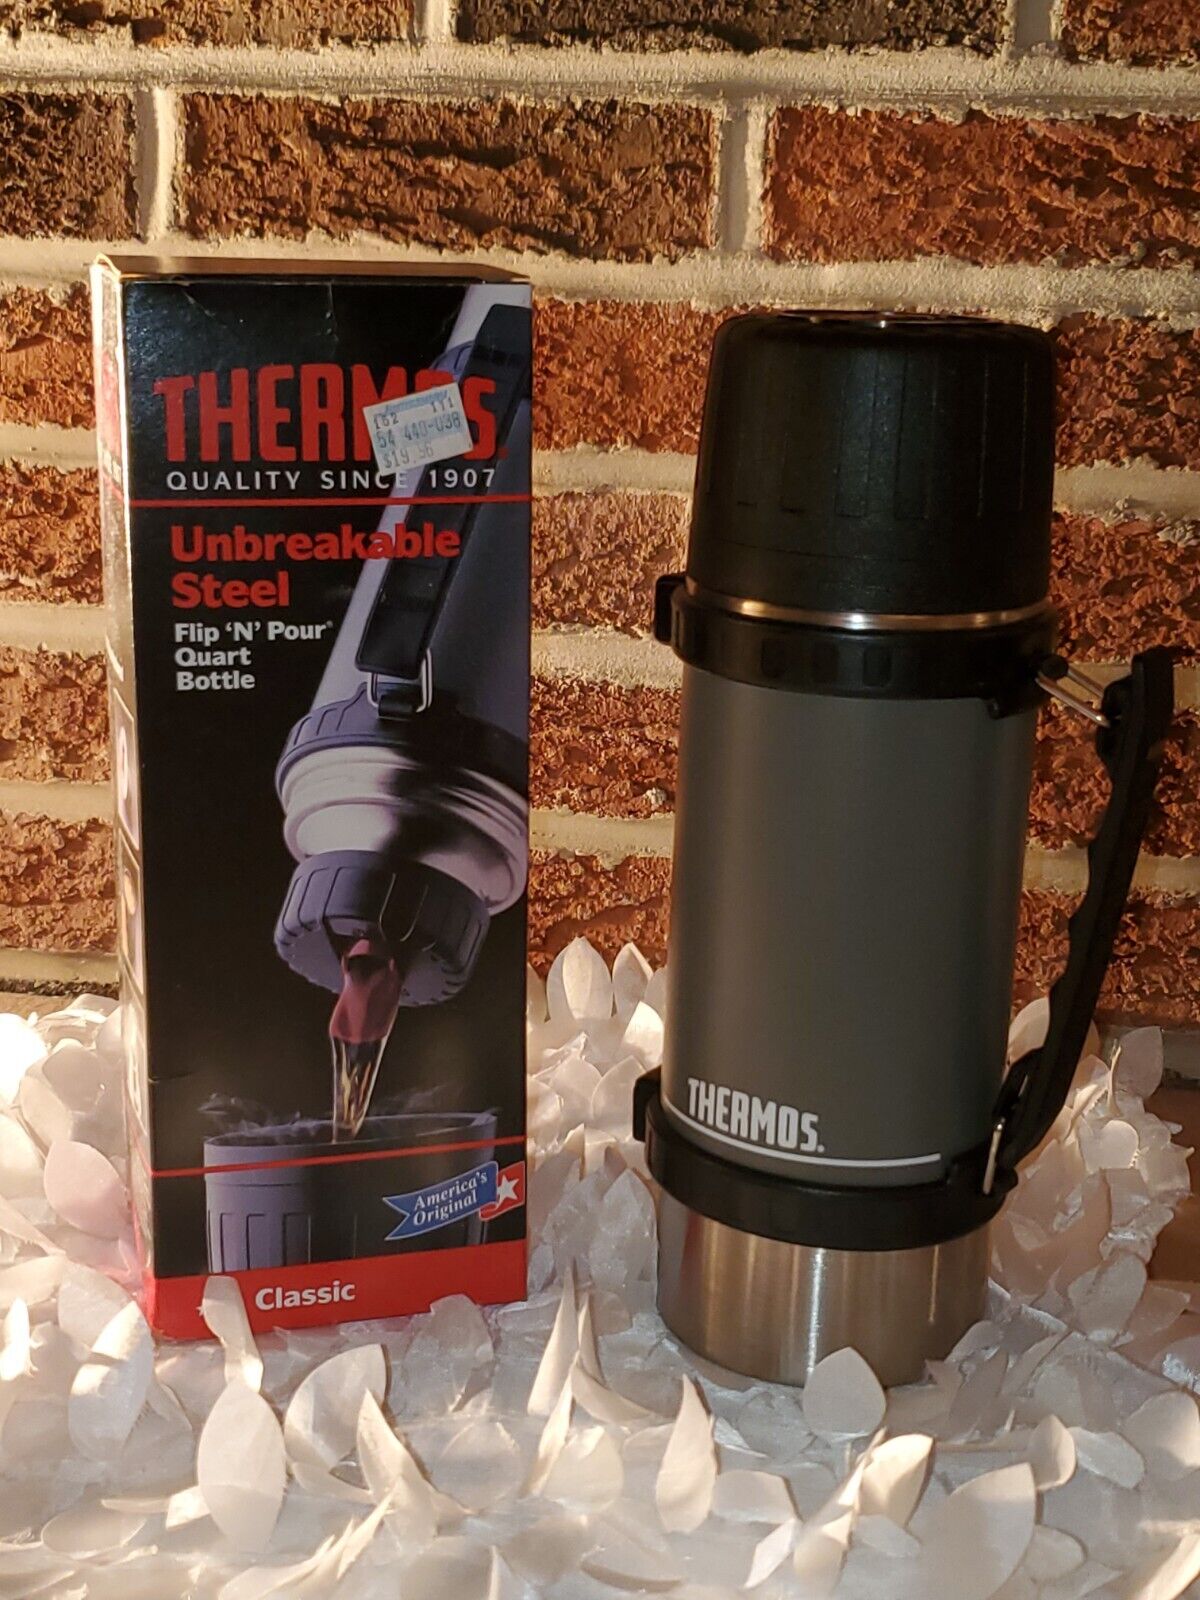 Vintage BRAND NEW Thermos Unbreakable Steel Flip N Pour Quart Bottle Collectable